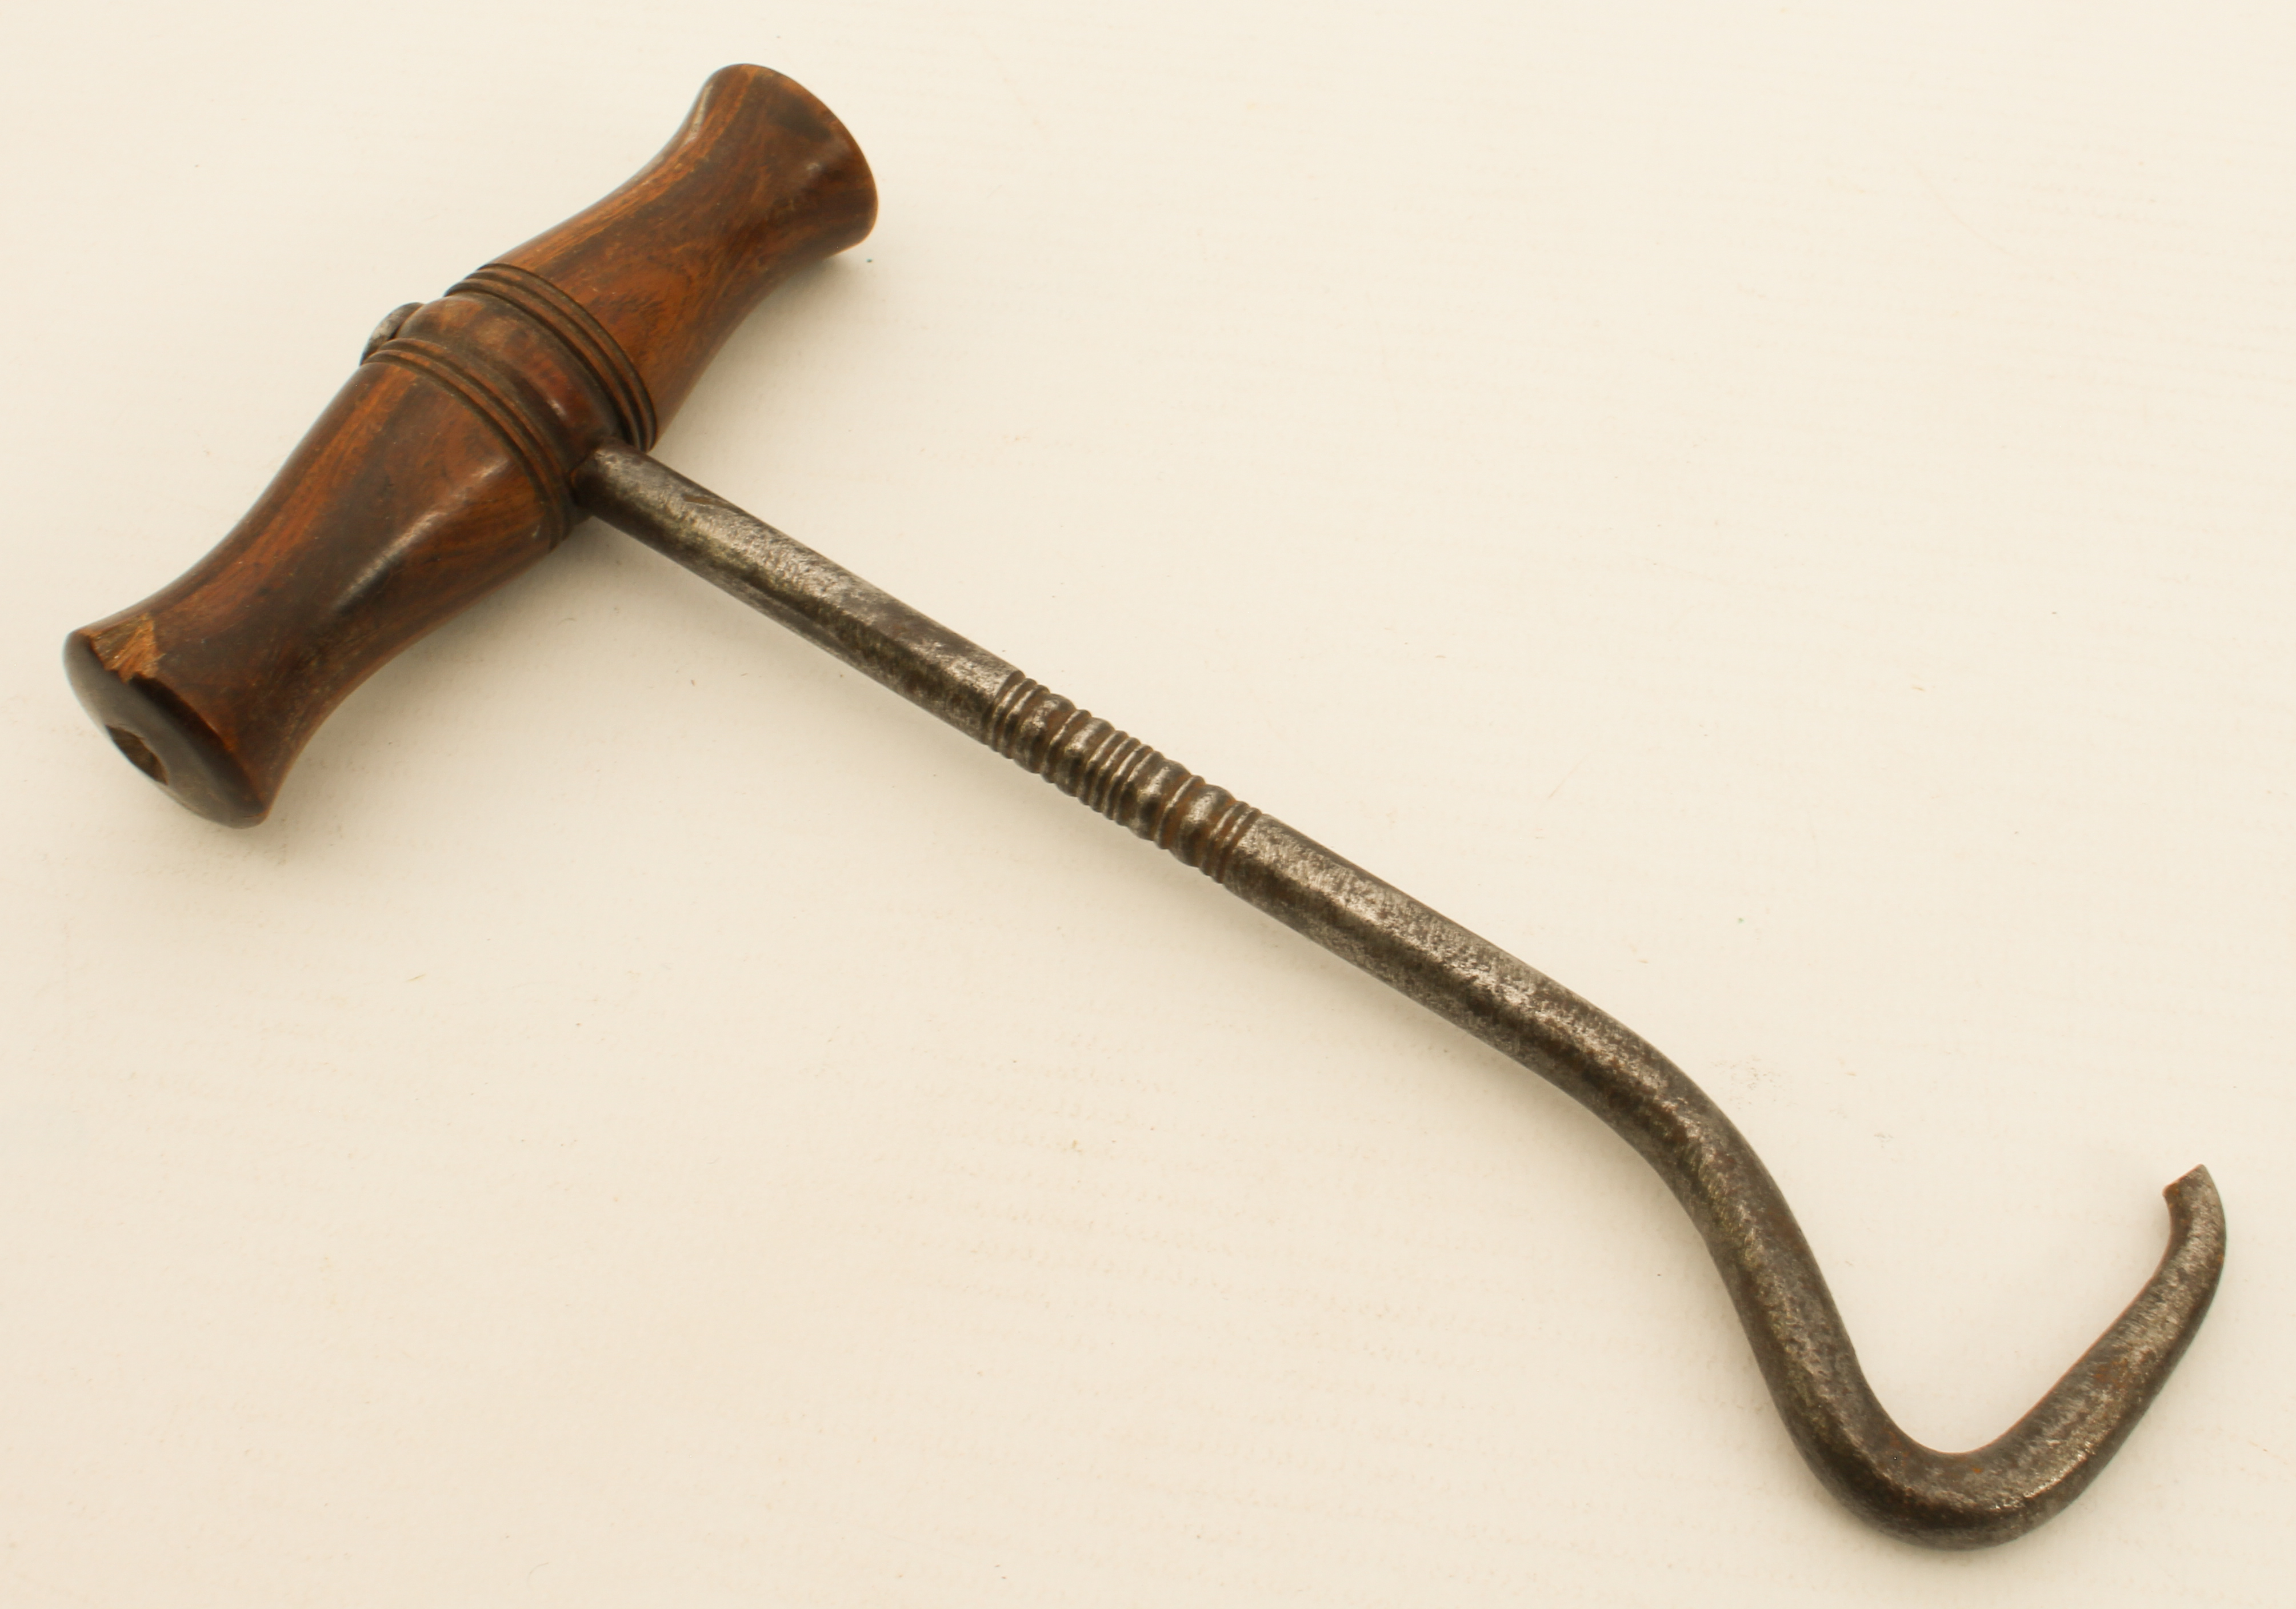 Two 19th century corkscrews - one with turned lignum vitae handle with brush and bronze stem, 12.8 - Image 3 of 5